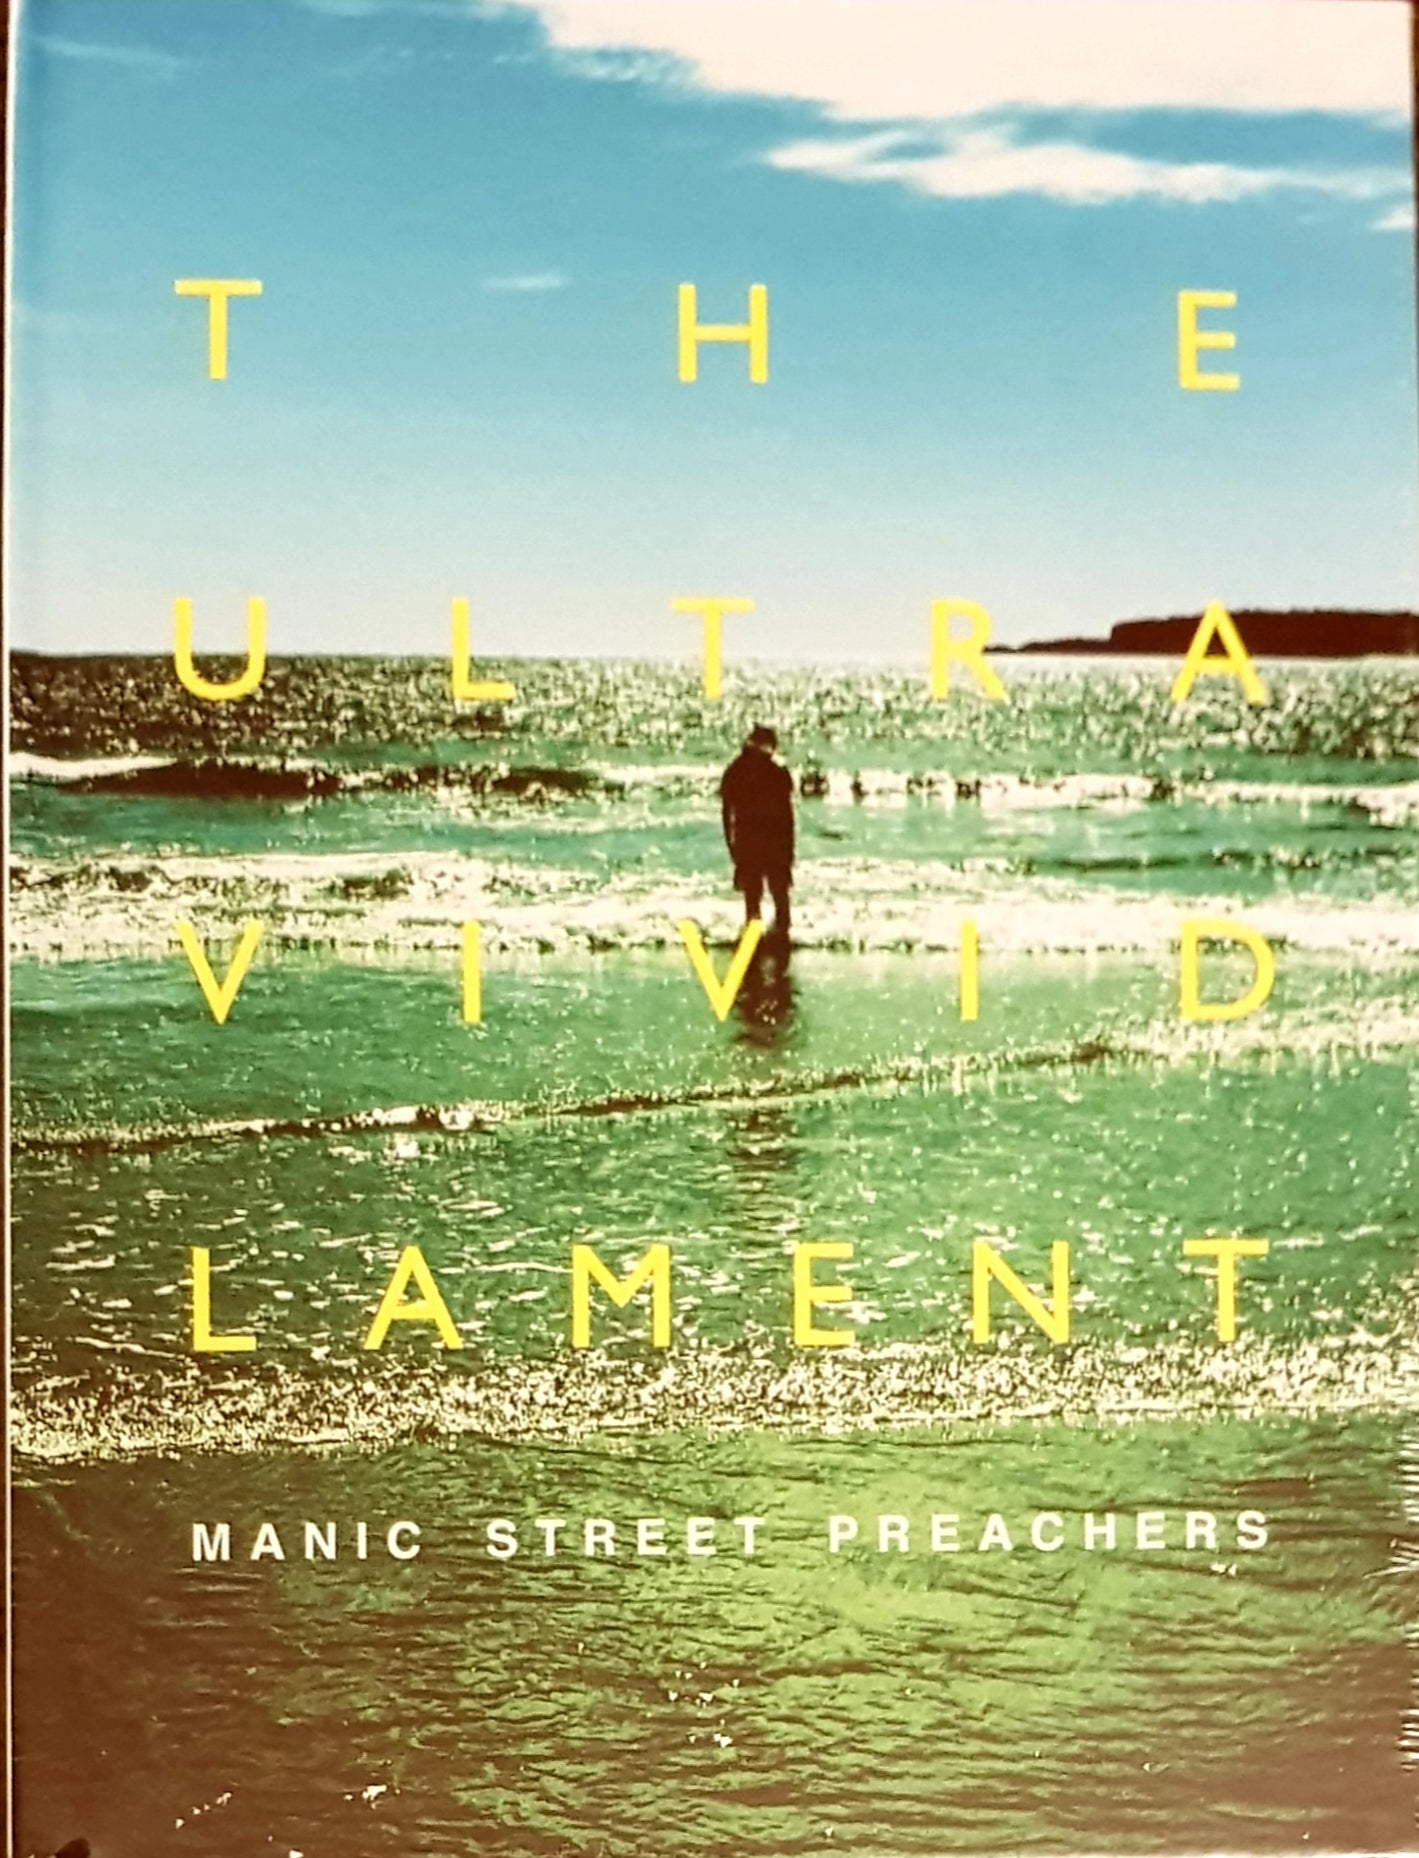 SIGNIERTE Manic Street Preachers: The Ultra Vivid Lament - 2xCD in Hardcover-Hülle